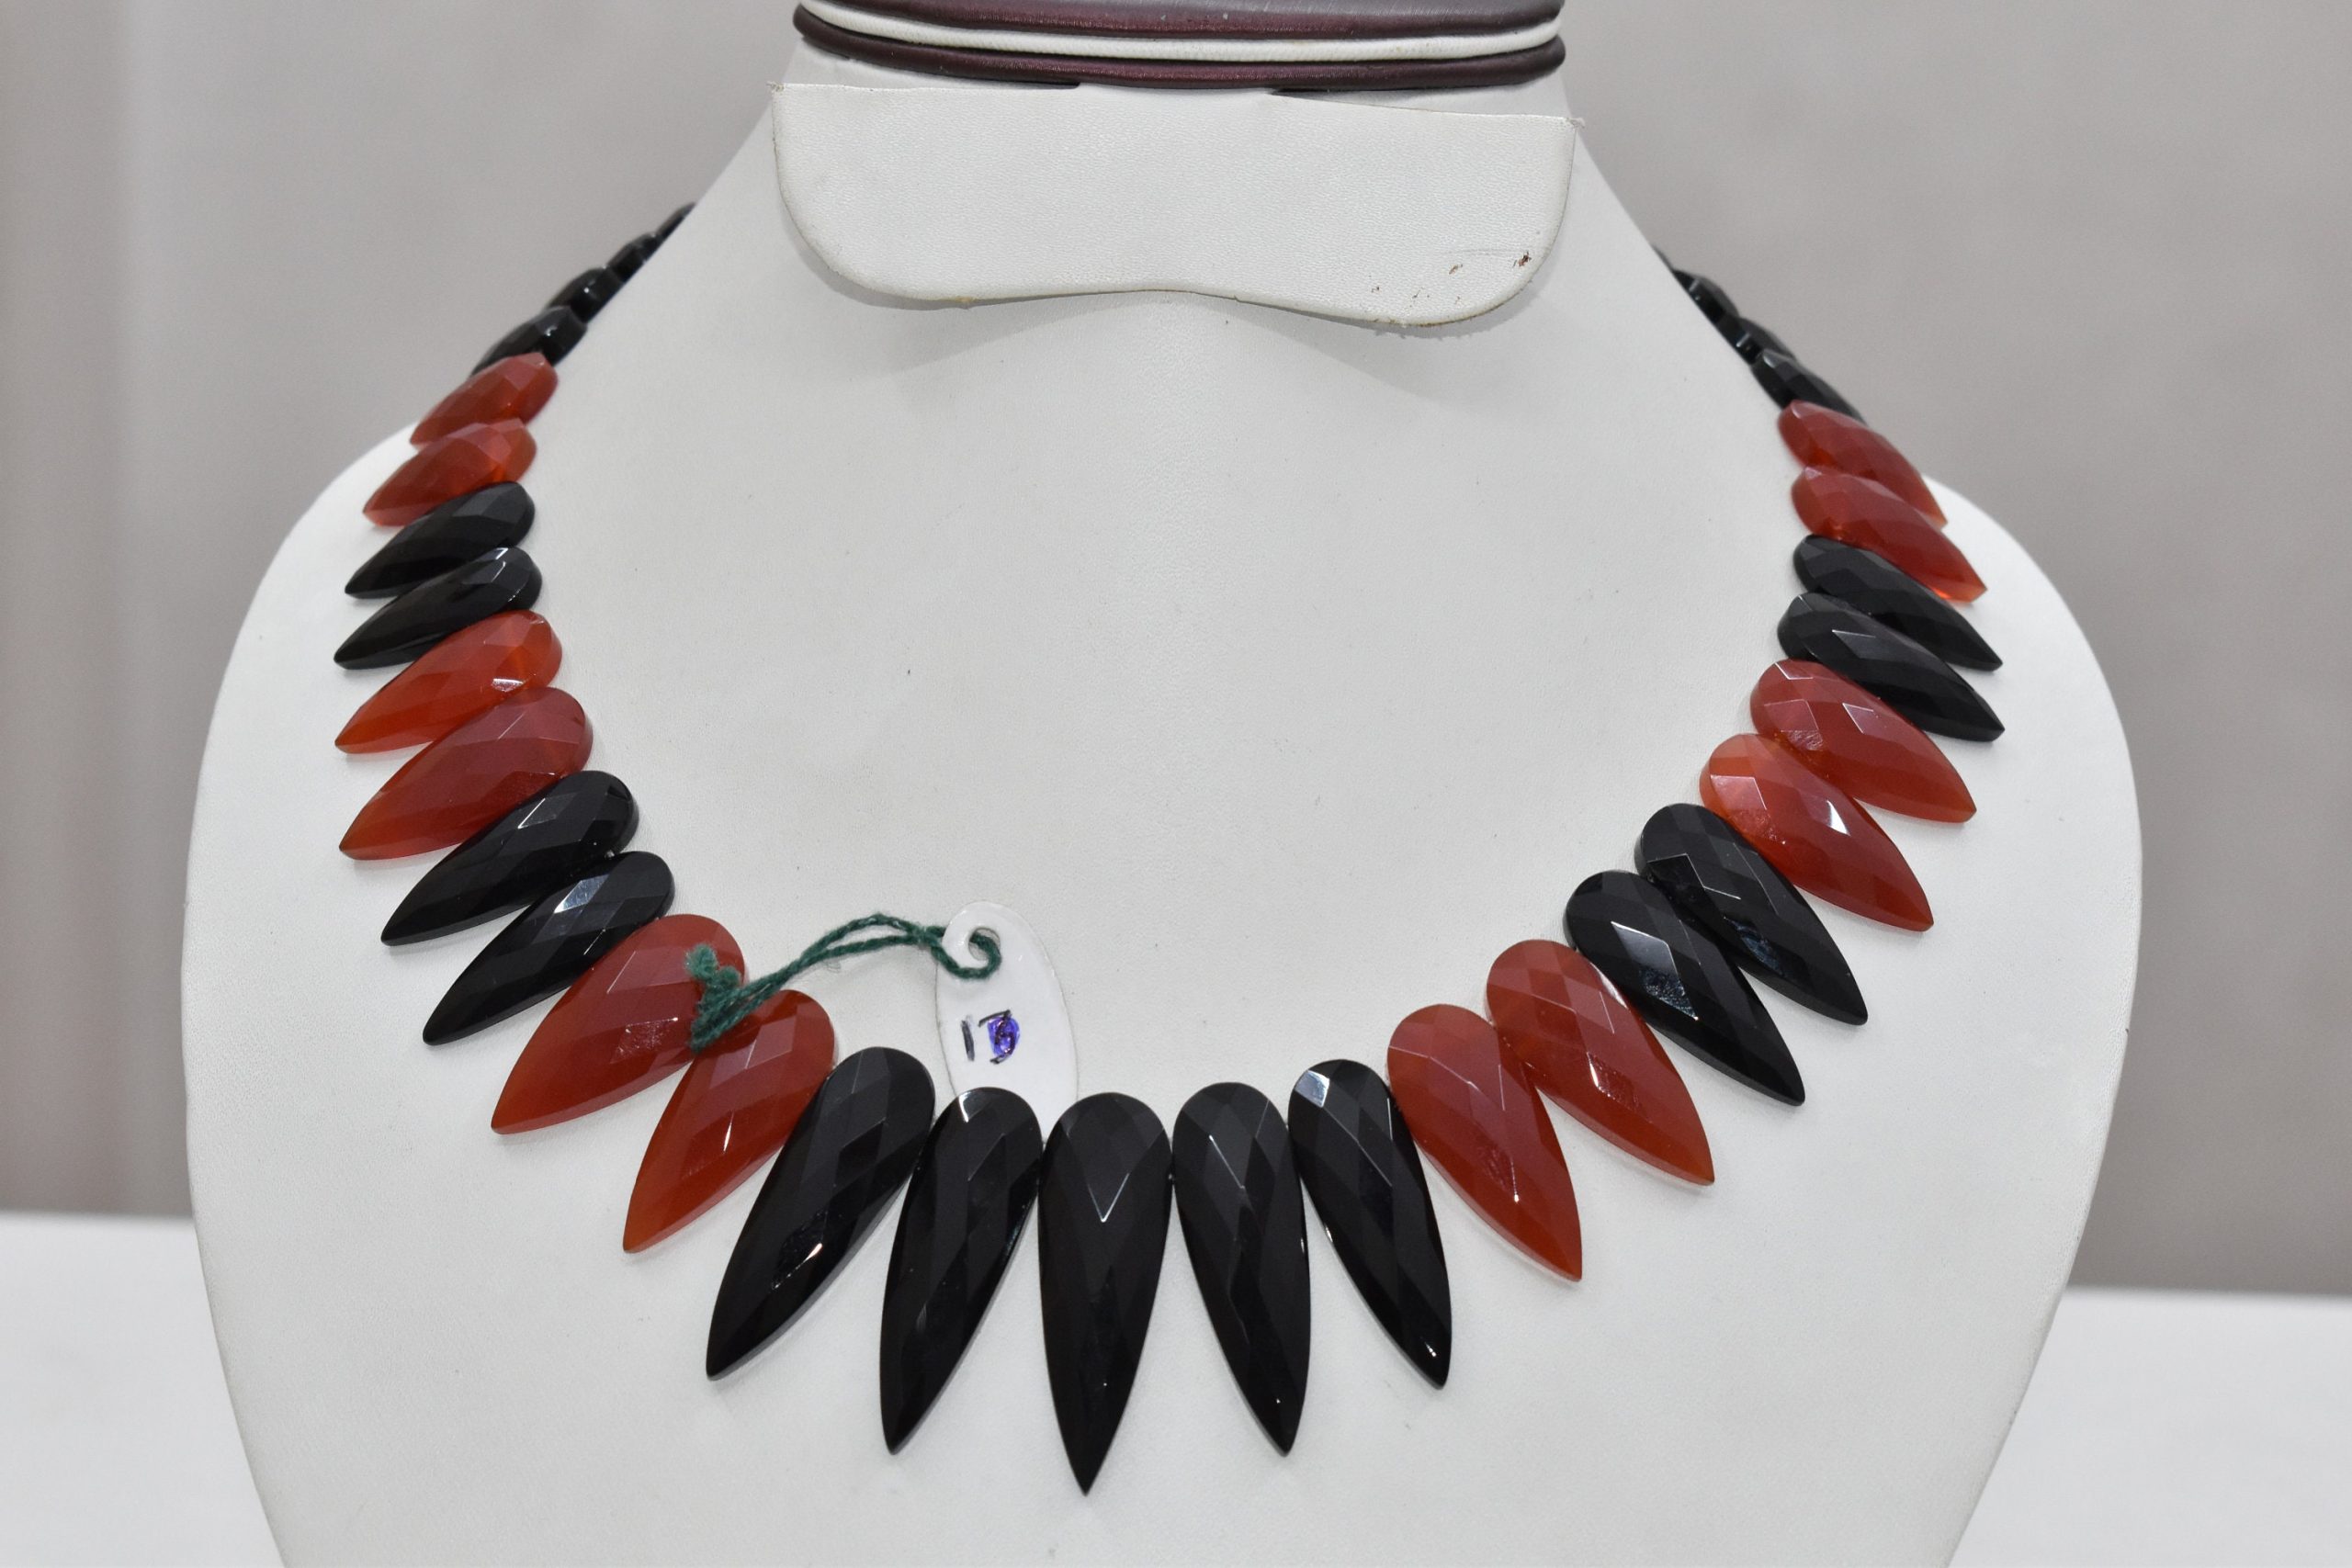 100% Natural Onyx Handmade Necklace,Collar Necklace,Princess Necklace,Choker Necklace,Bib Necklace,Matinee Necklace,Handicraft Necklace. | Save 33% - Rajasthan Living 11